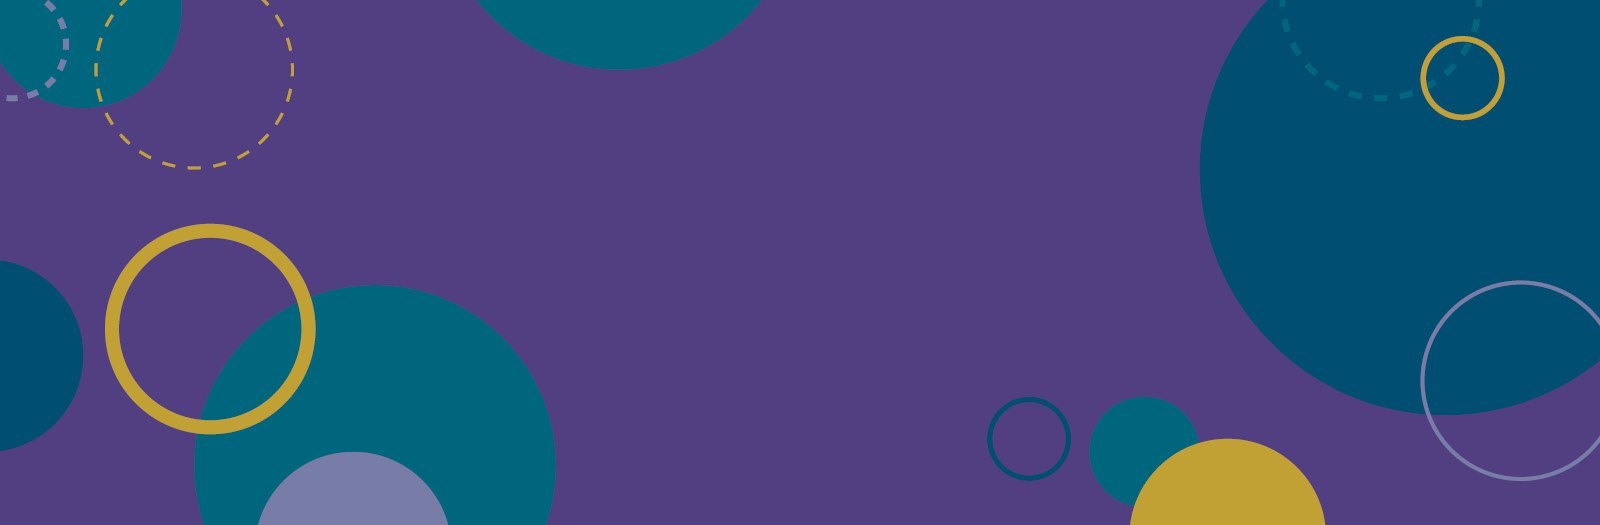 dark purple background with scattered circles in green, teal, blue, white and gold